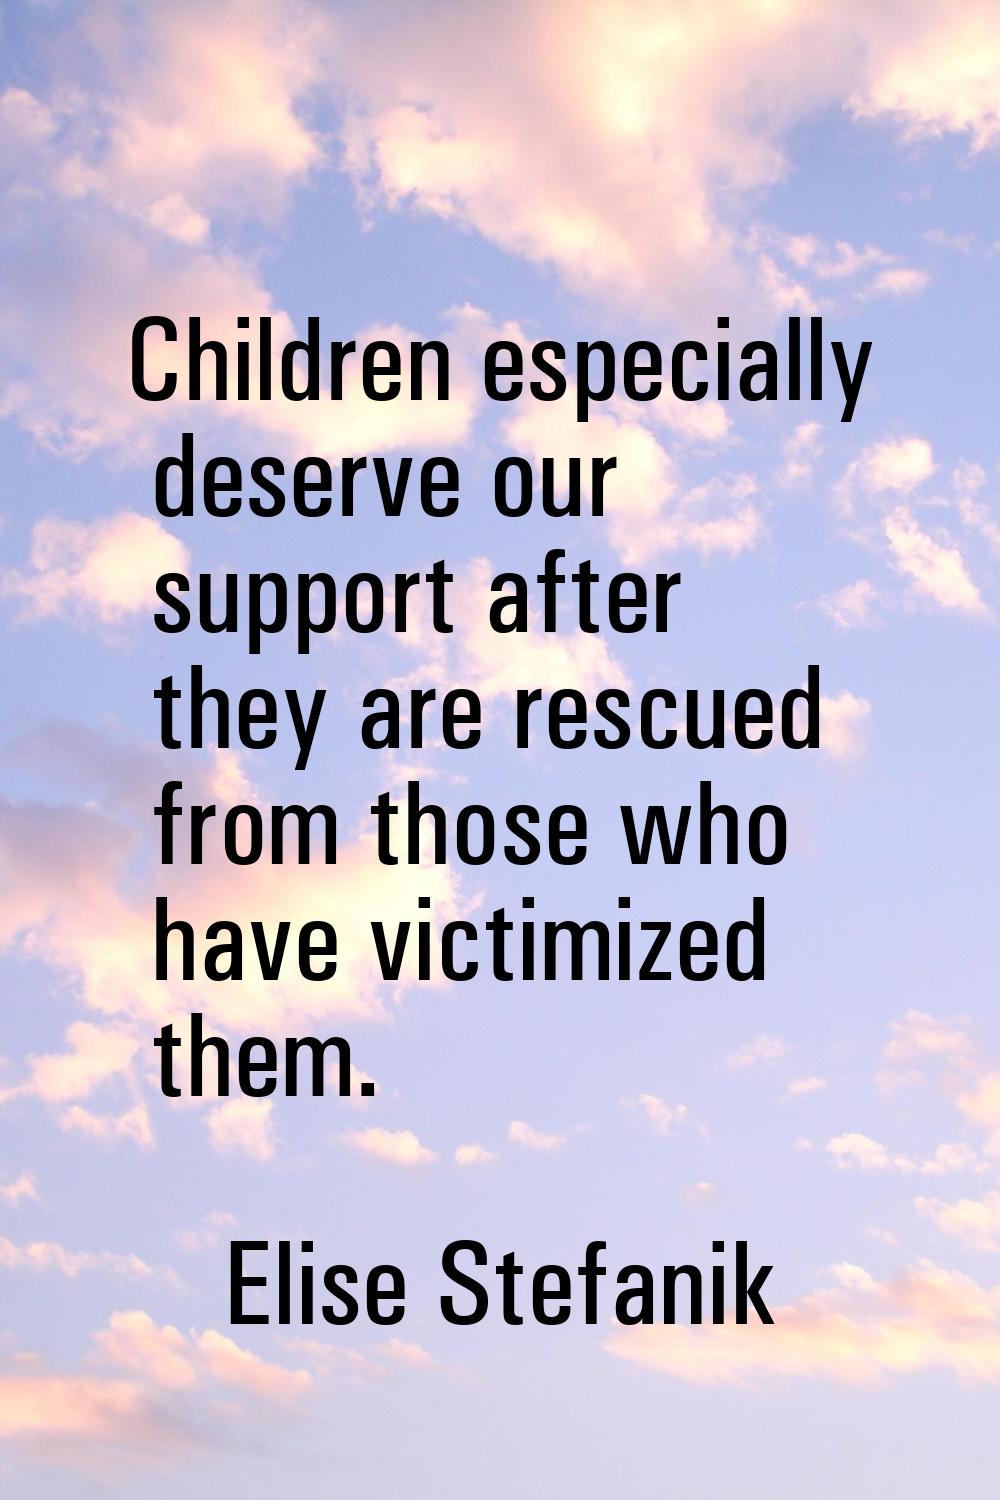 Children especially deserve our support after they are rescued from those who have victimized them.